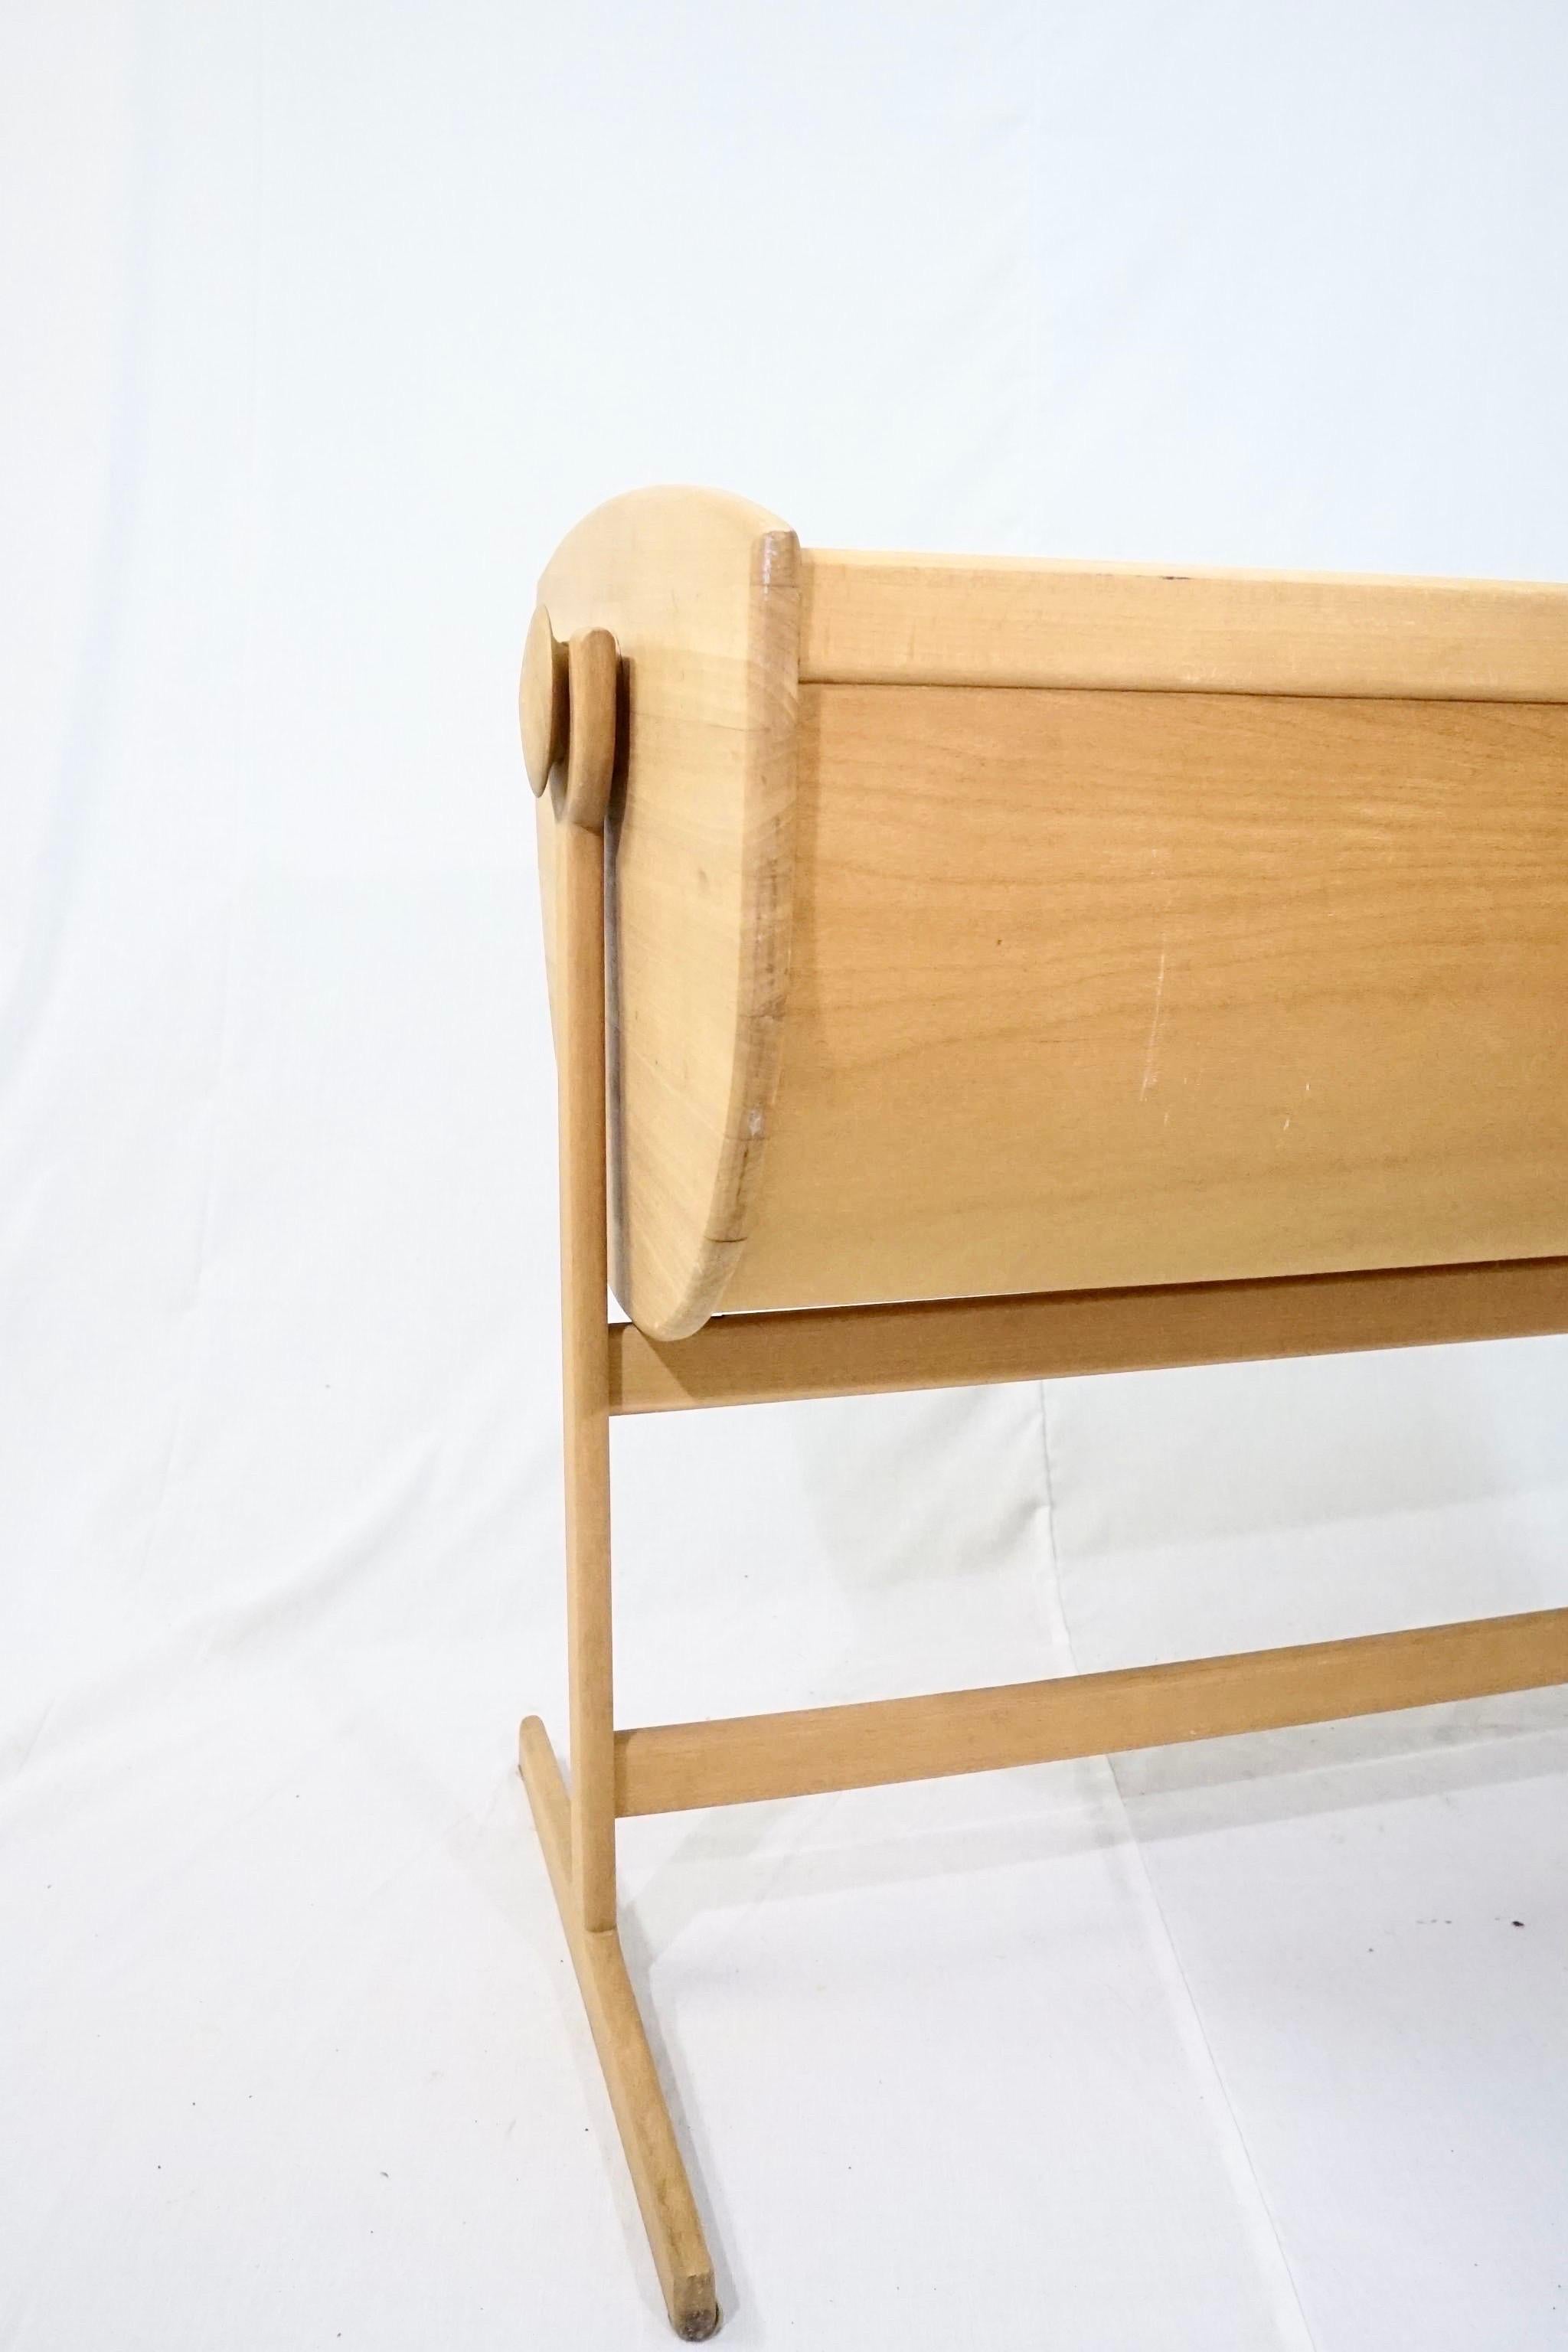 Nanna Ditzel cradle model Lulu in patinaed beech wood, the cradle is manufactured by Kold Savværk. This cradle is named after one of Nanna Ditzel’s daughter’s Lulu.